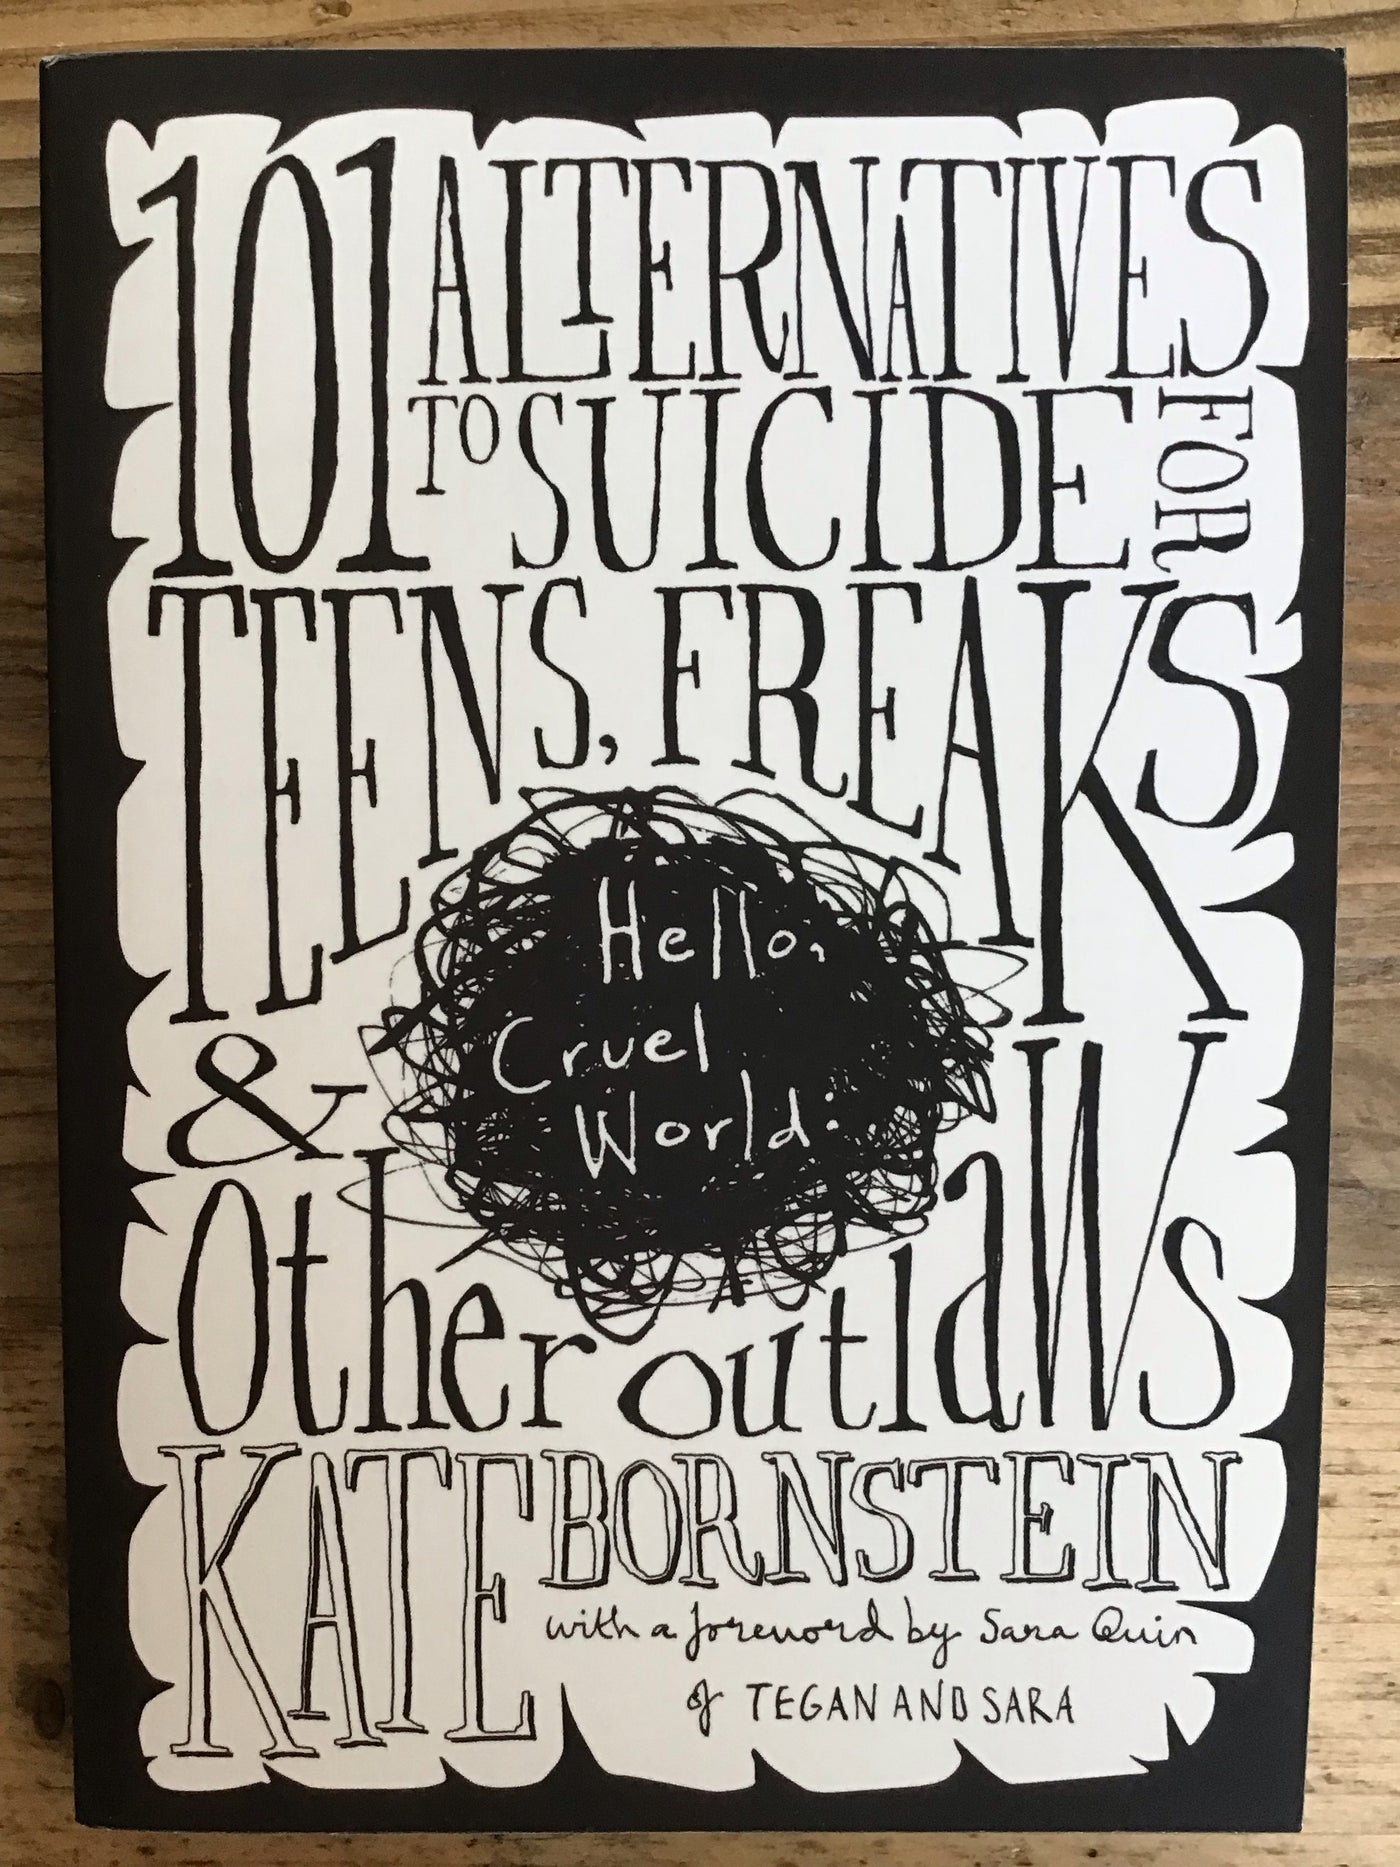 Hello, Cruel World: 101 Alternatives to Suicide for Teens, Freaks & Other Outlaws